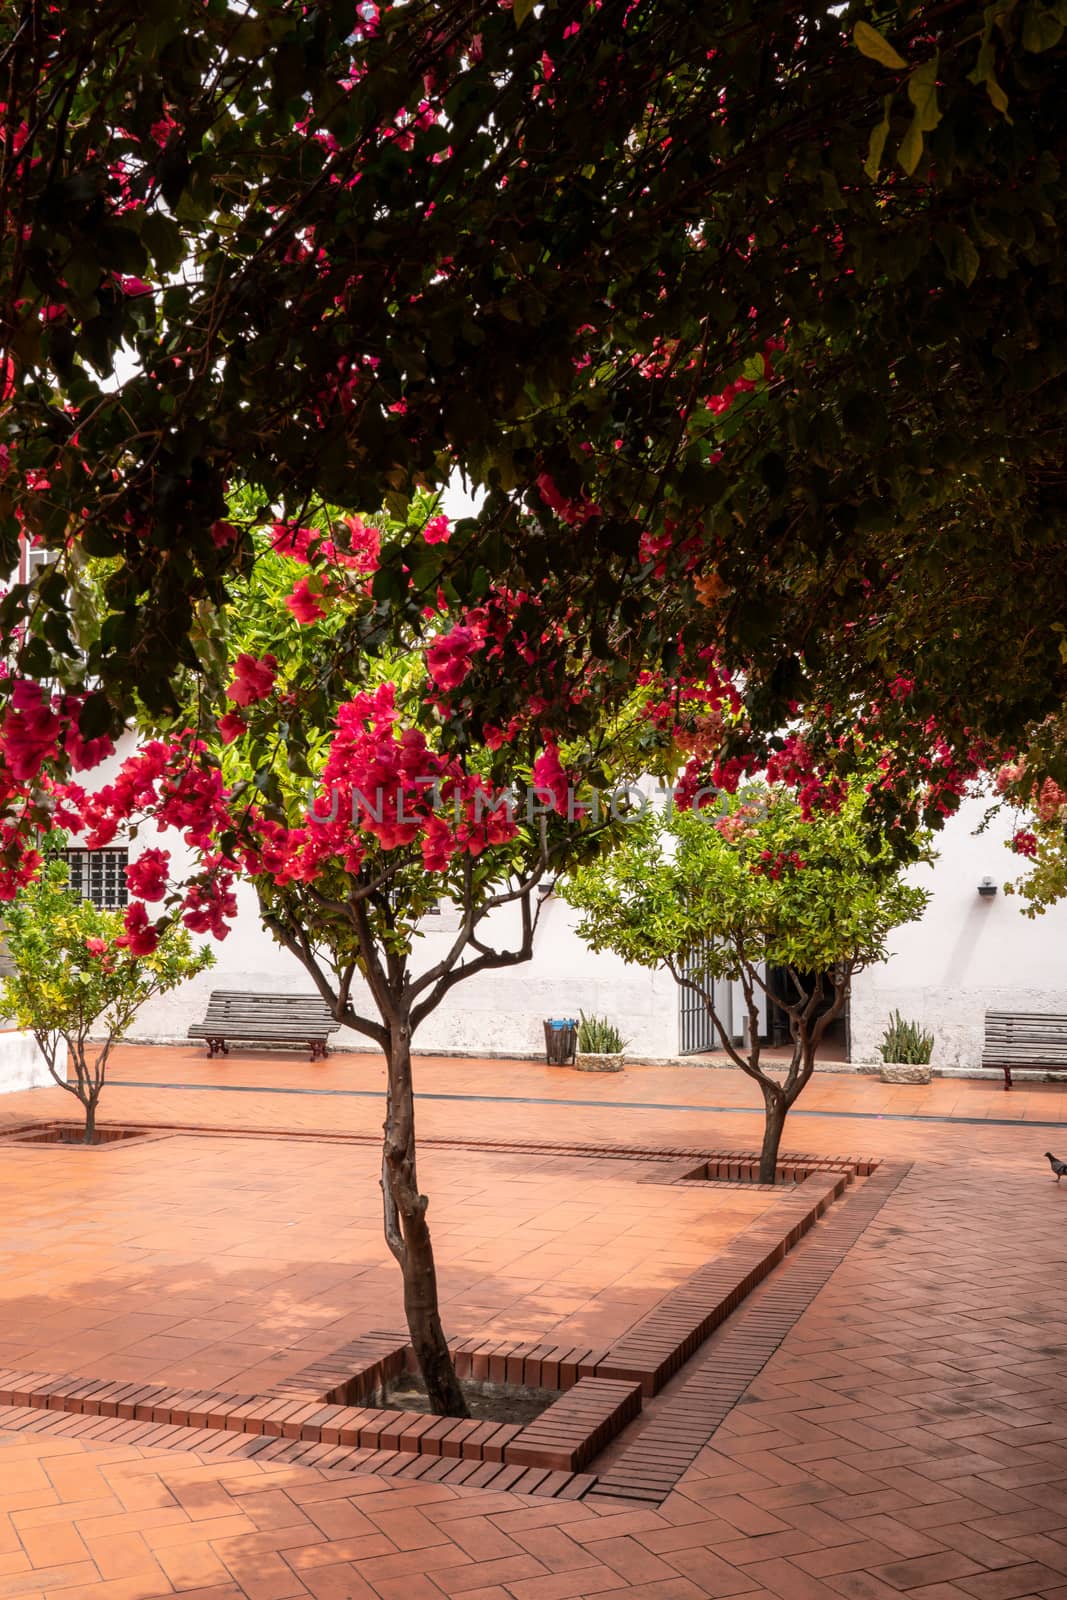 Cloisters and flowering trees in courtyard of Sao Vicente de Fora church in Alfama district